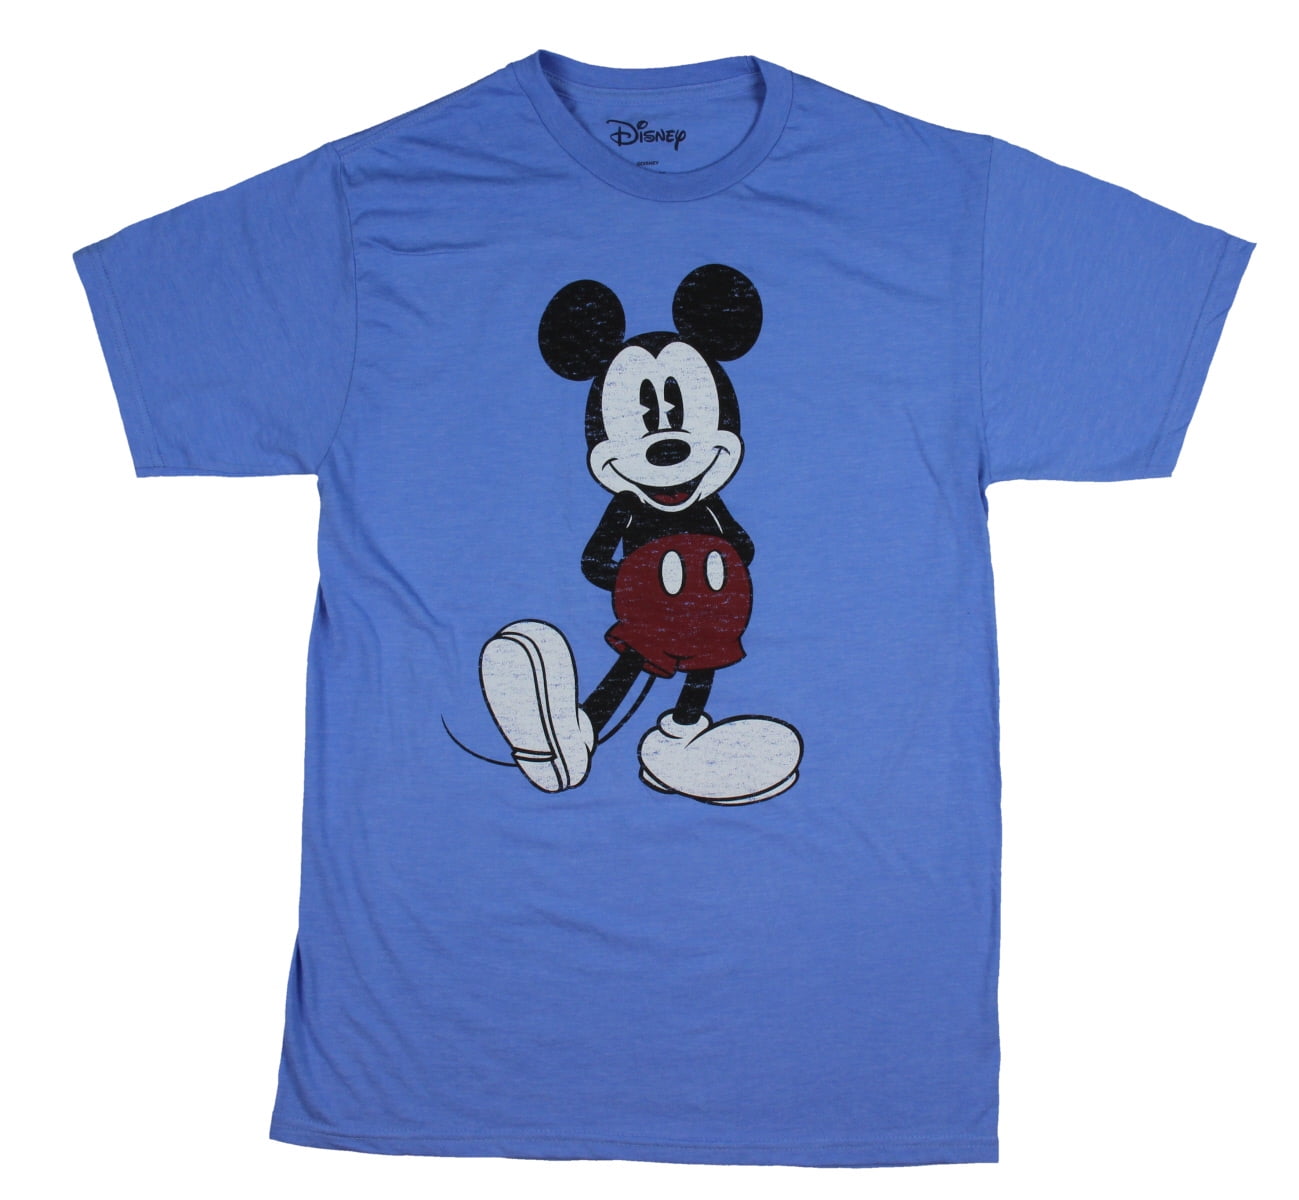 Disney Mickey Mouse Full Pose Distressed Charcoal Heather Men's T-Shirt New